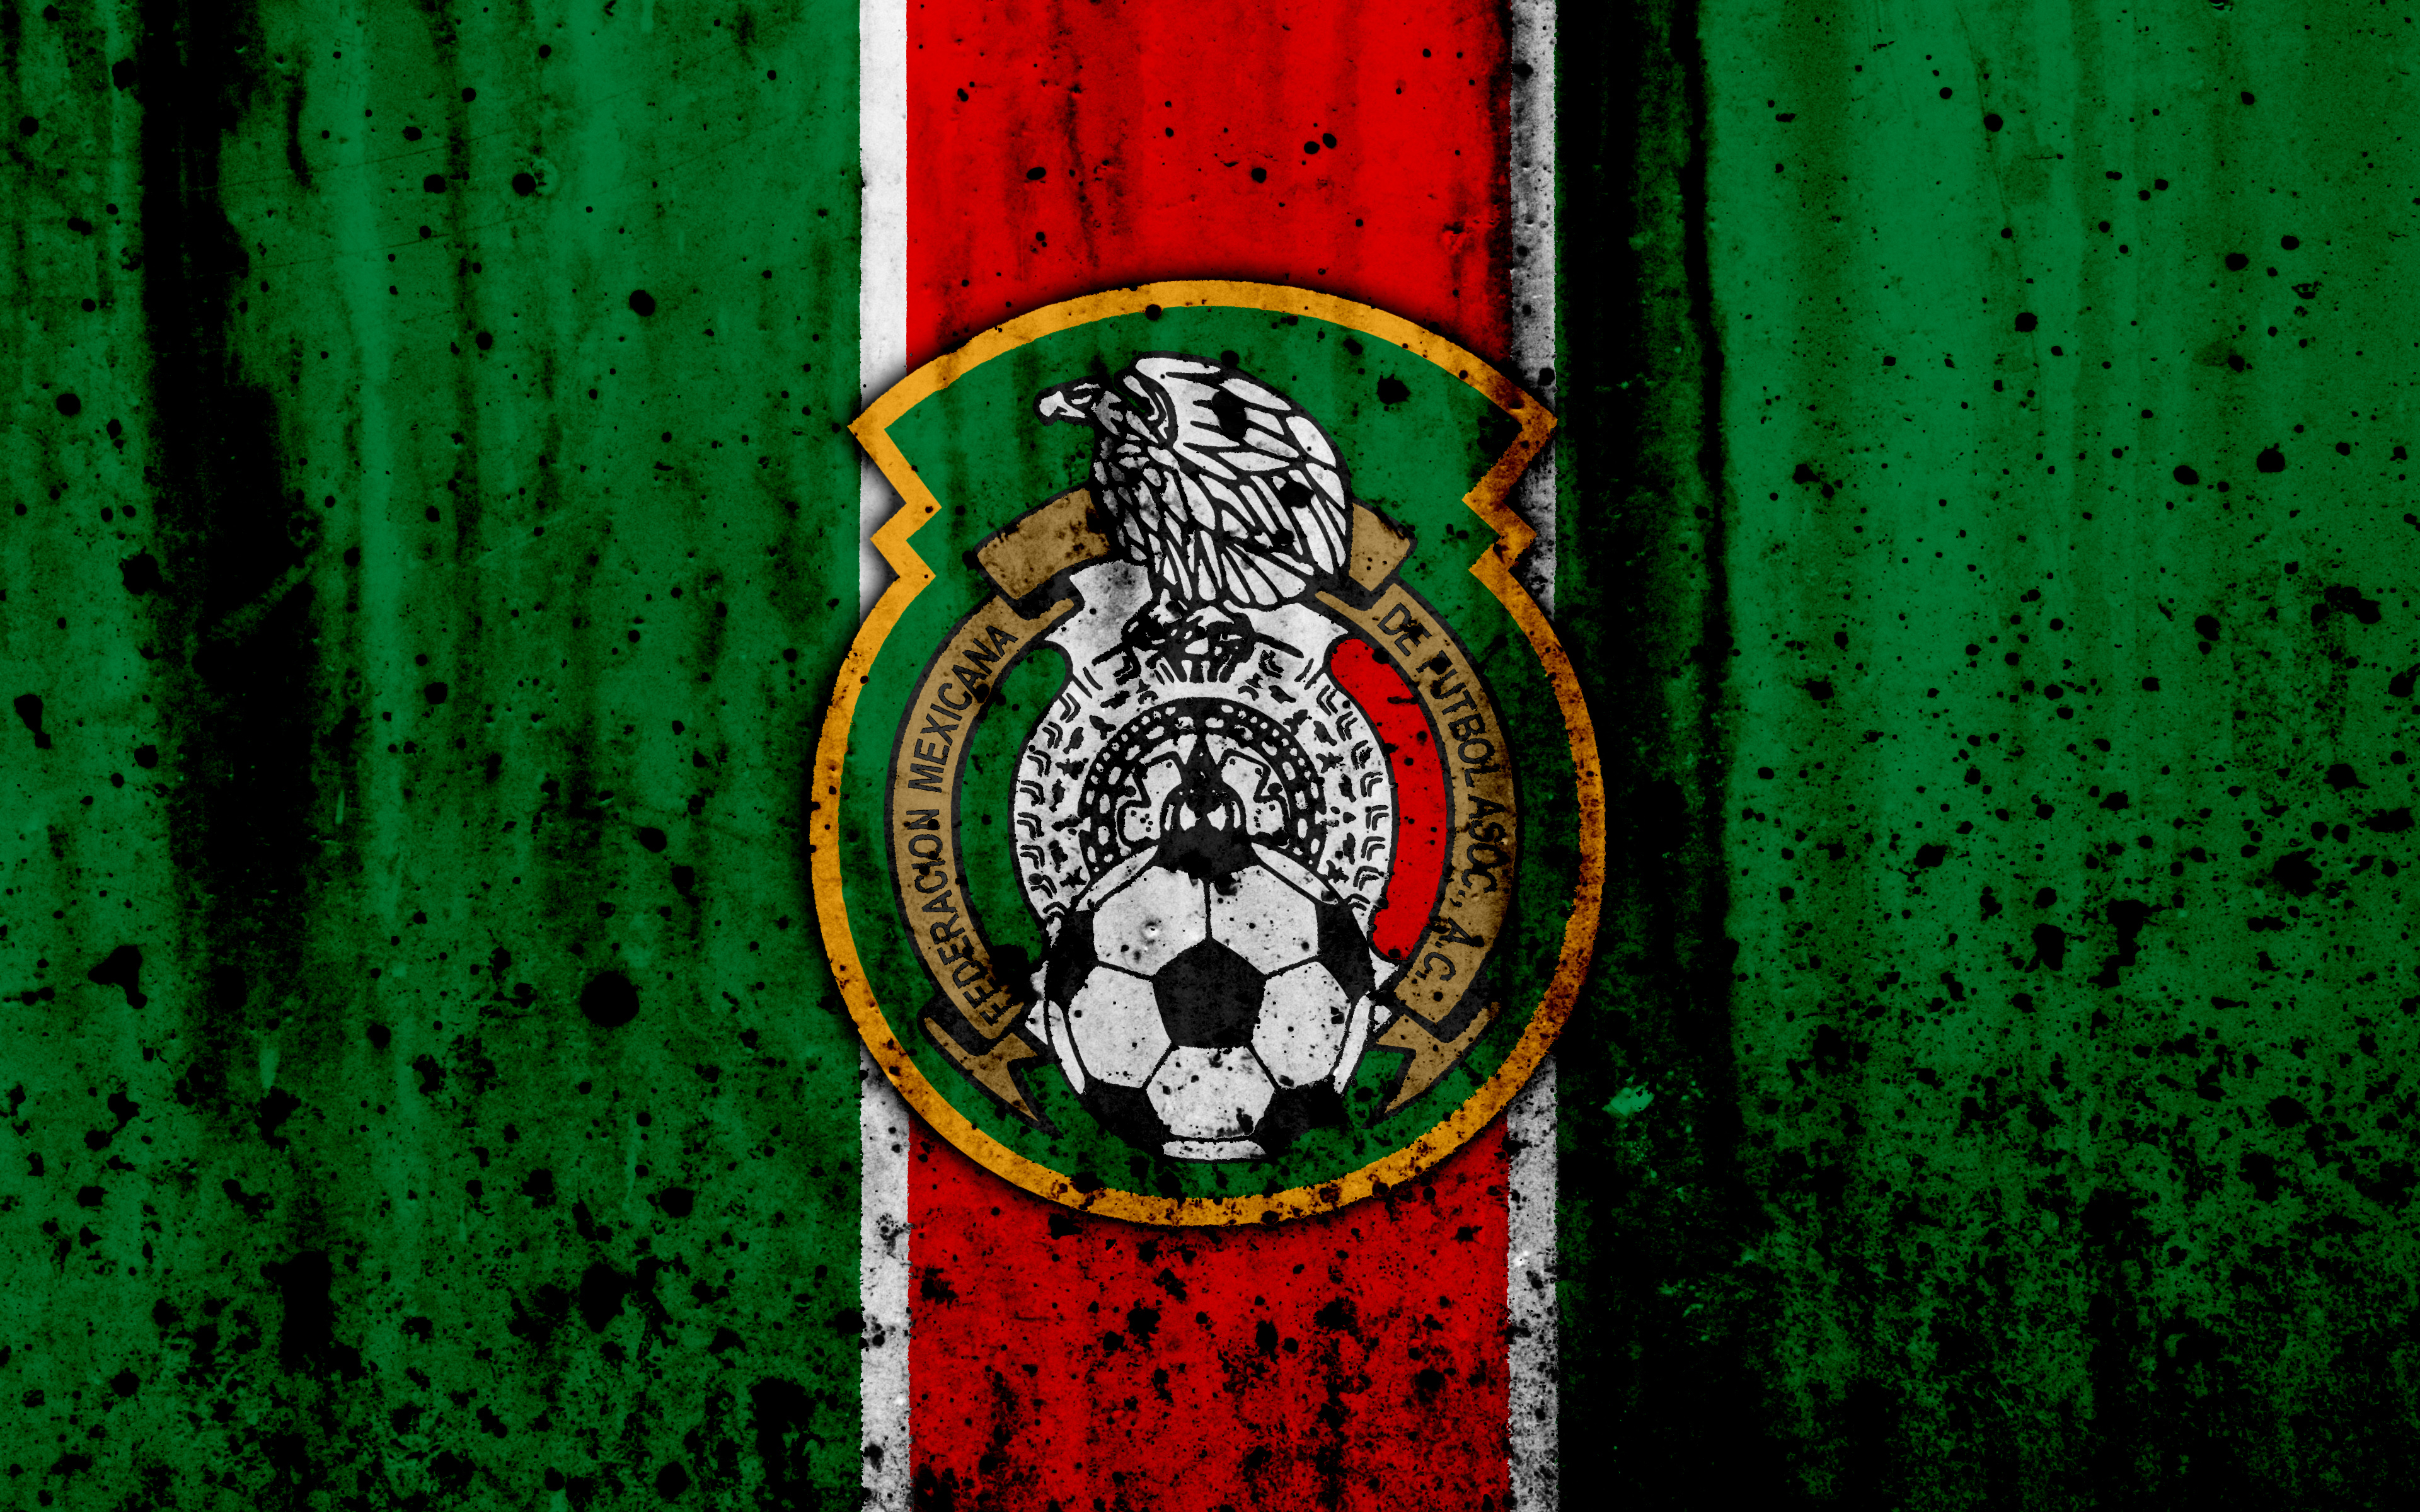 HD mexican soccer team wallpapers  Peakpx